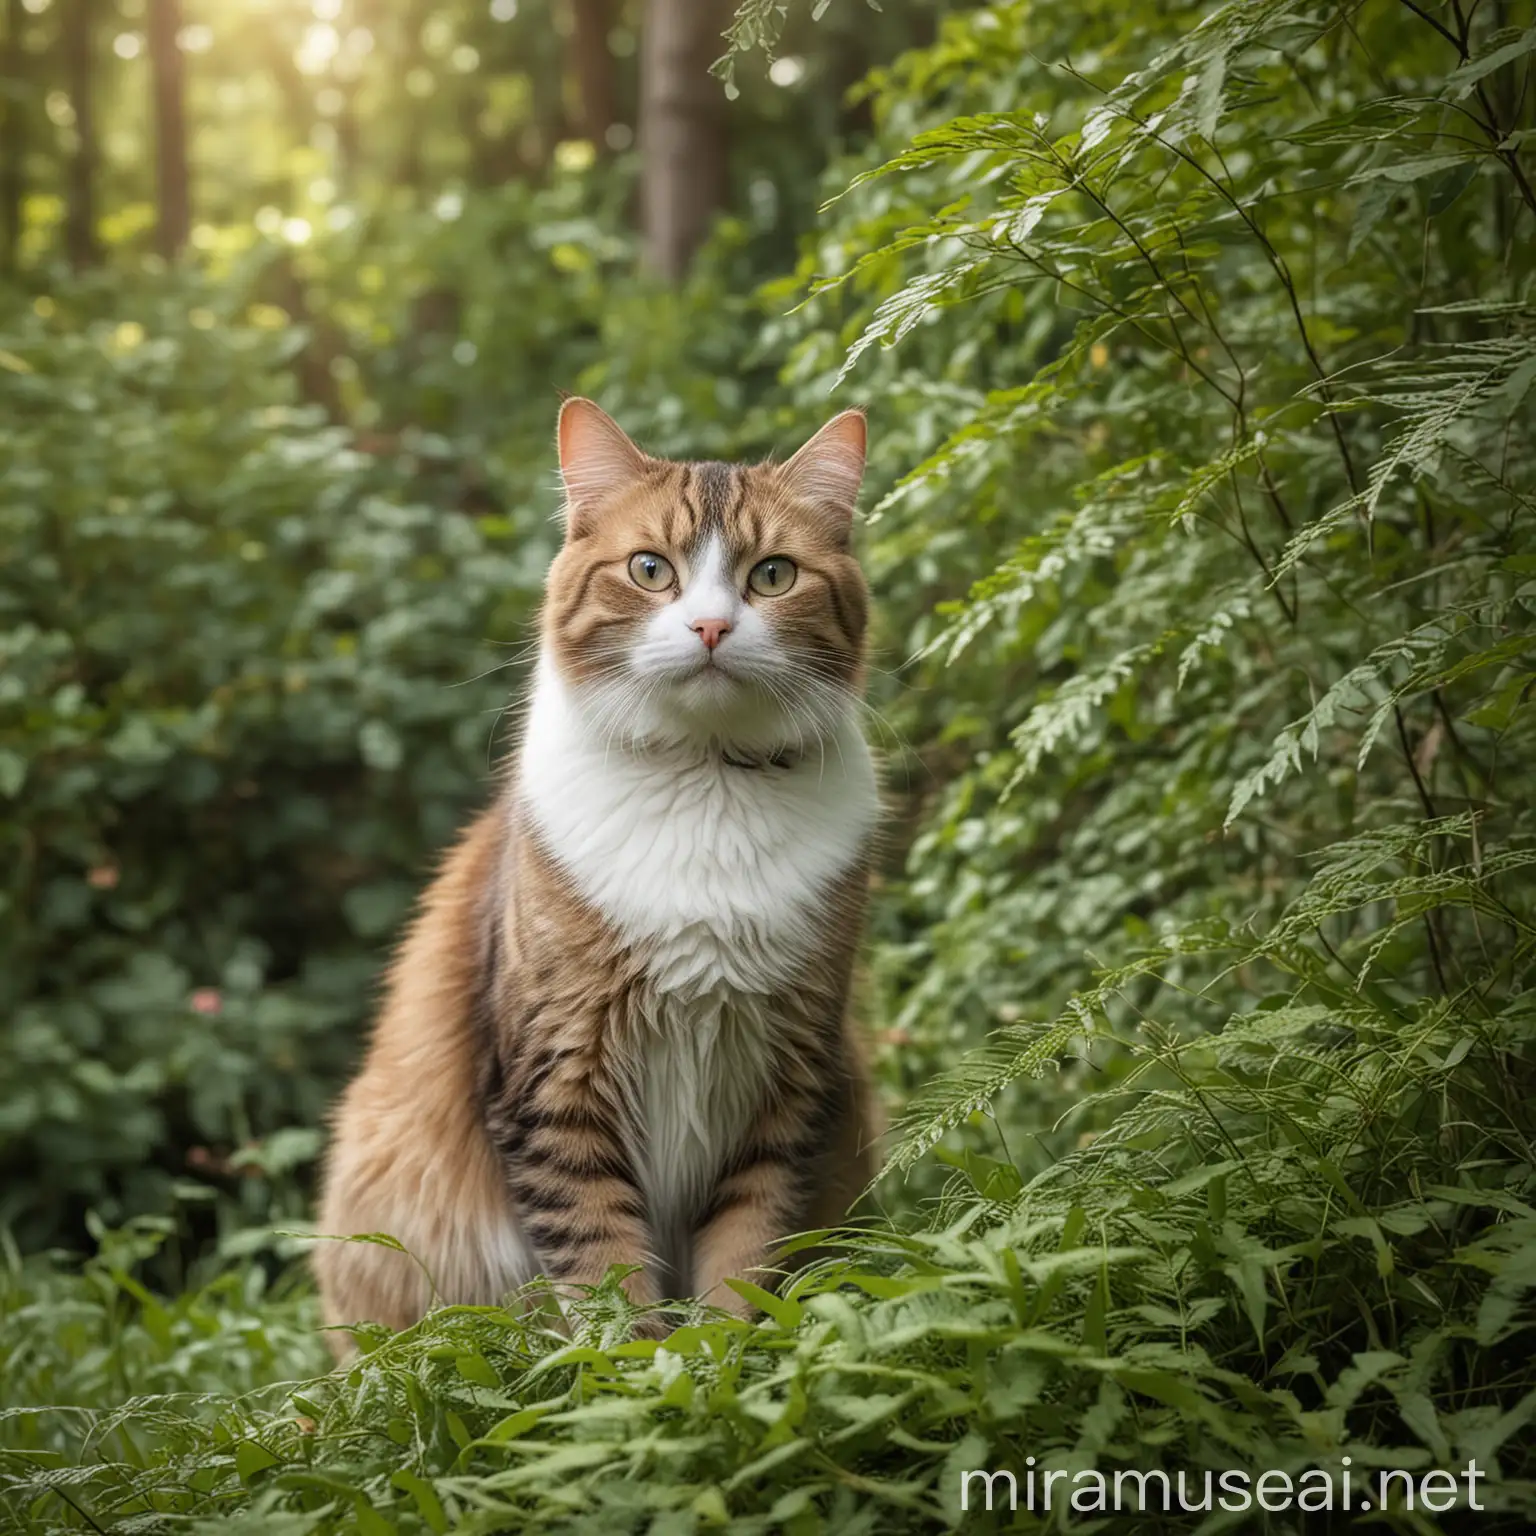 Capture moments of your cat in natural surroundings like parks, gardens, beaches, or forests to showcase their bond with nature.
